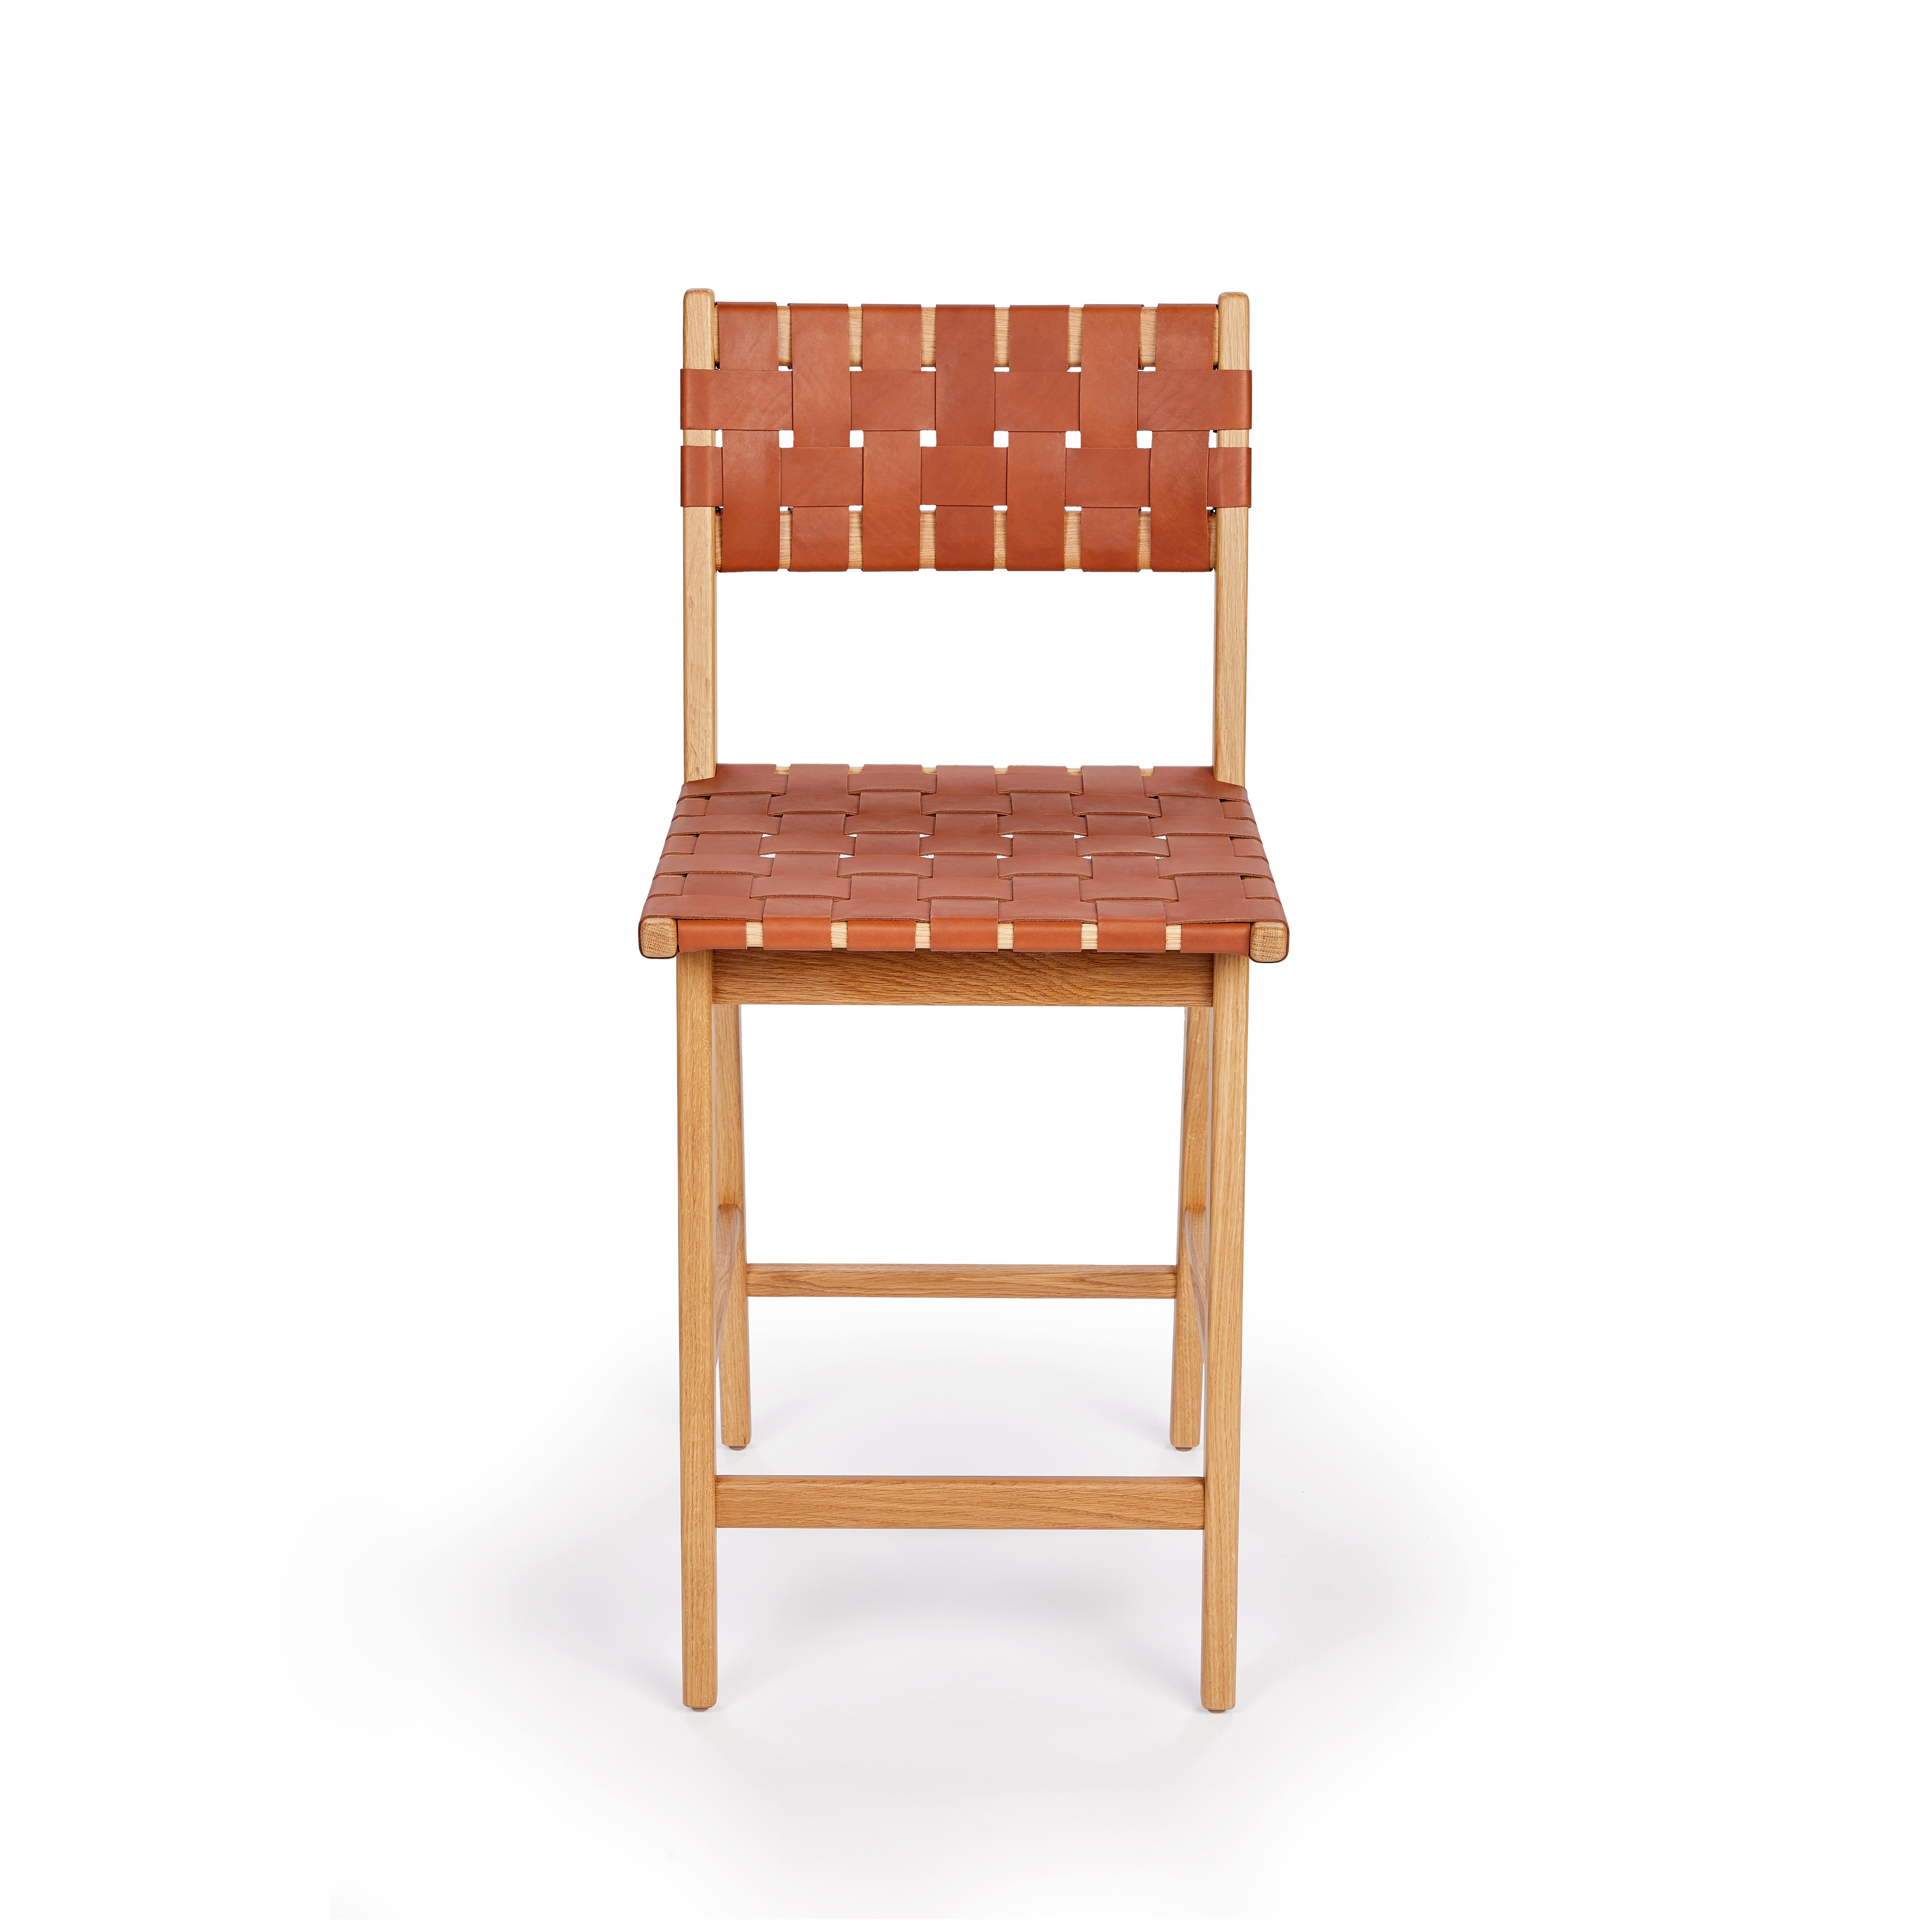 Originally designed by Mel Smilow in 1956 and officially reintroduced by his daughter Judy Smilow in 2016, the Woven Leather Backed Counter stool is classically midcentury. The simplistic beauty, fine craftsmanship, and exceptional detail is present